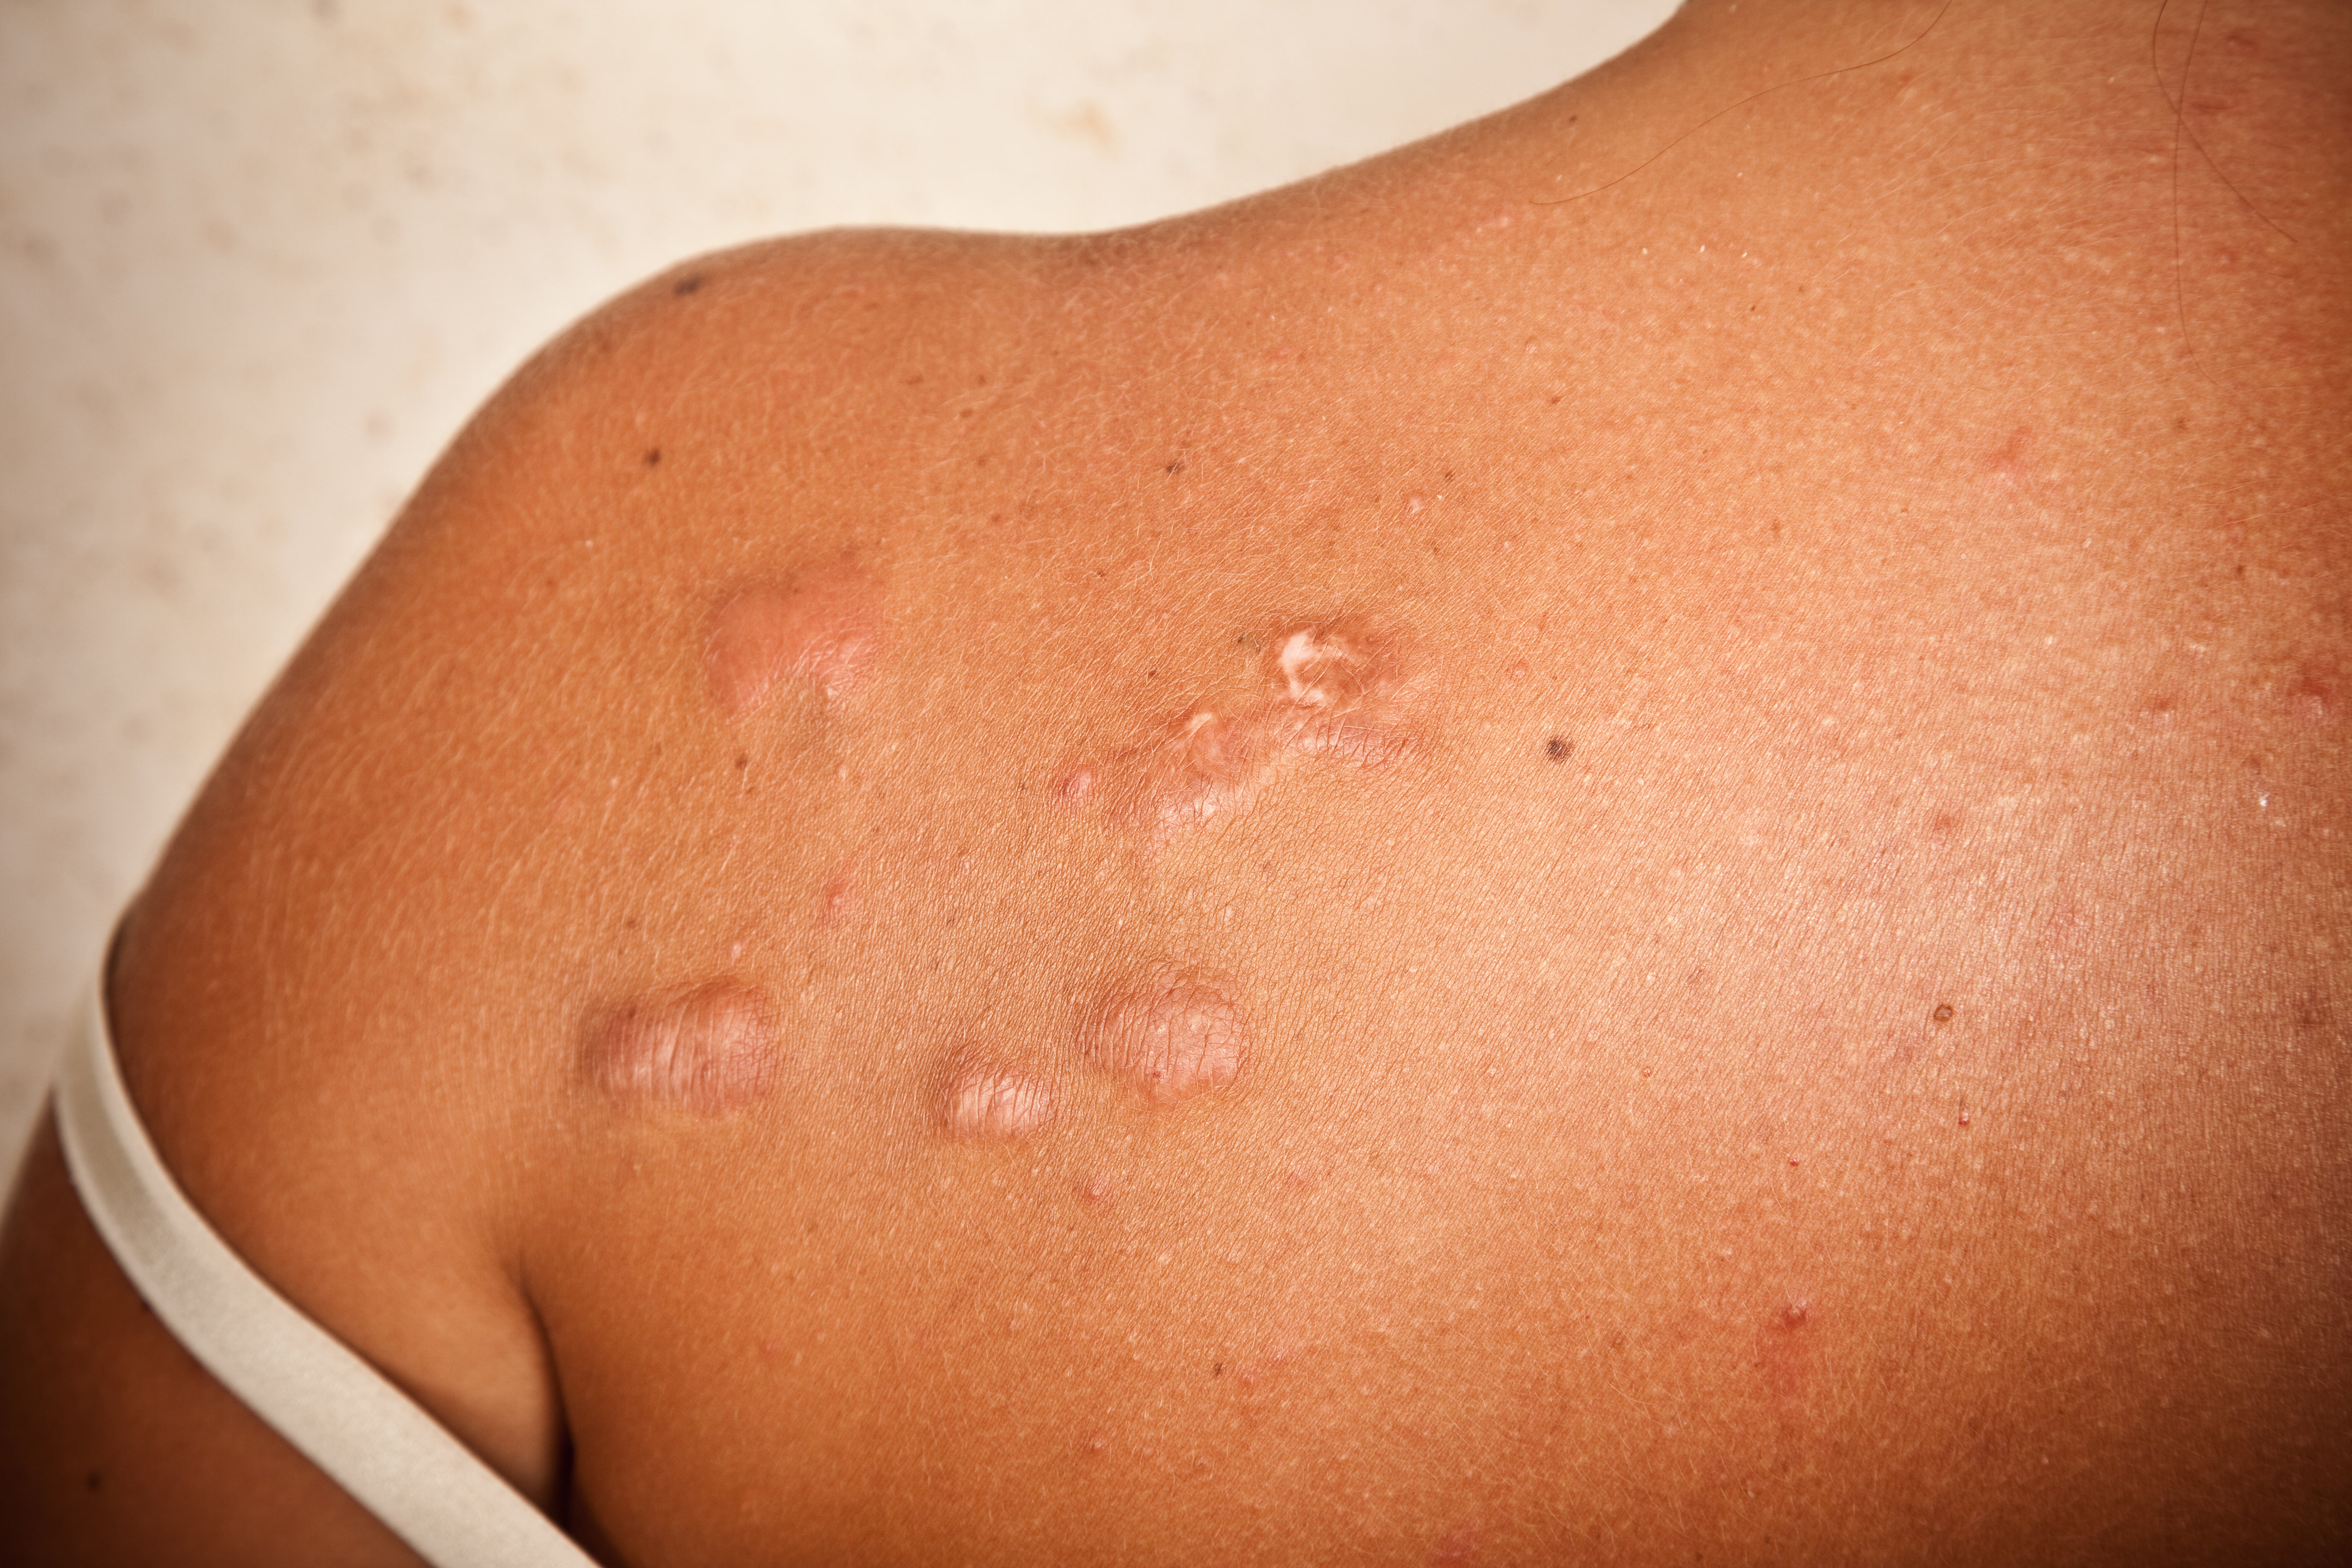 Black Skin Care 101: What Are Keloid Scars and How Can Black Women Get Rid of Them?